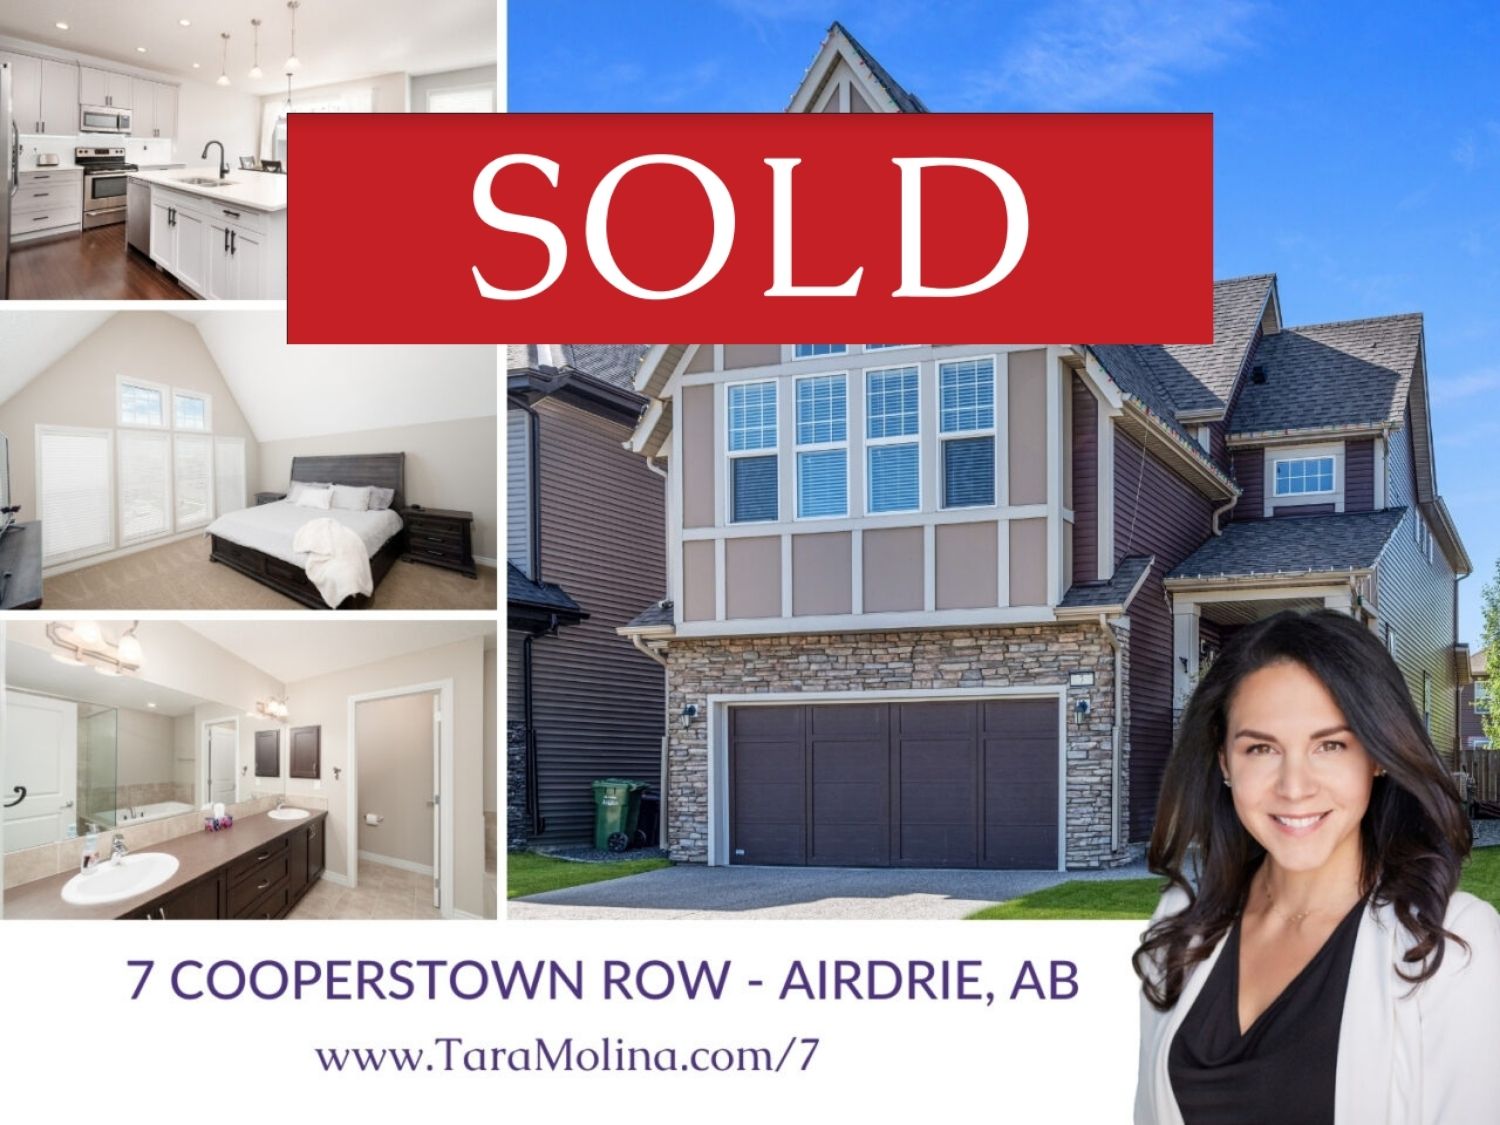 7 Cooperstown Row in Airdrie, AB